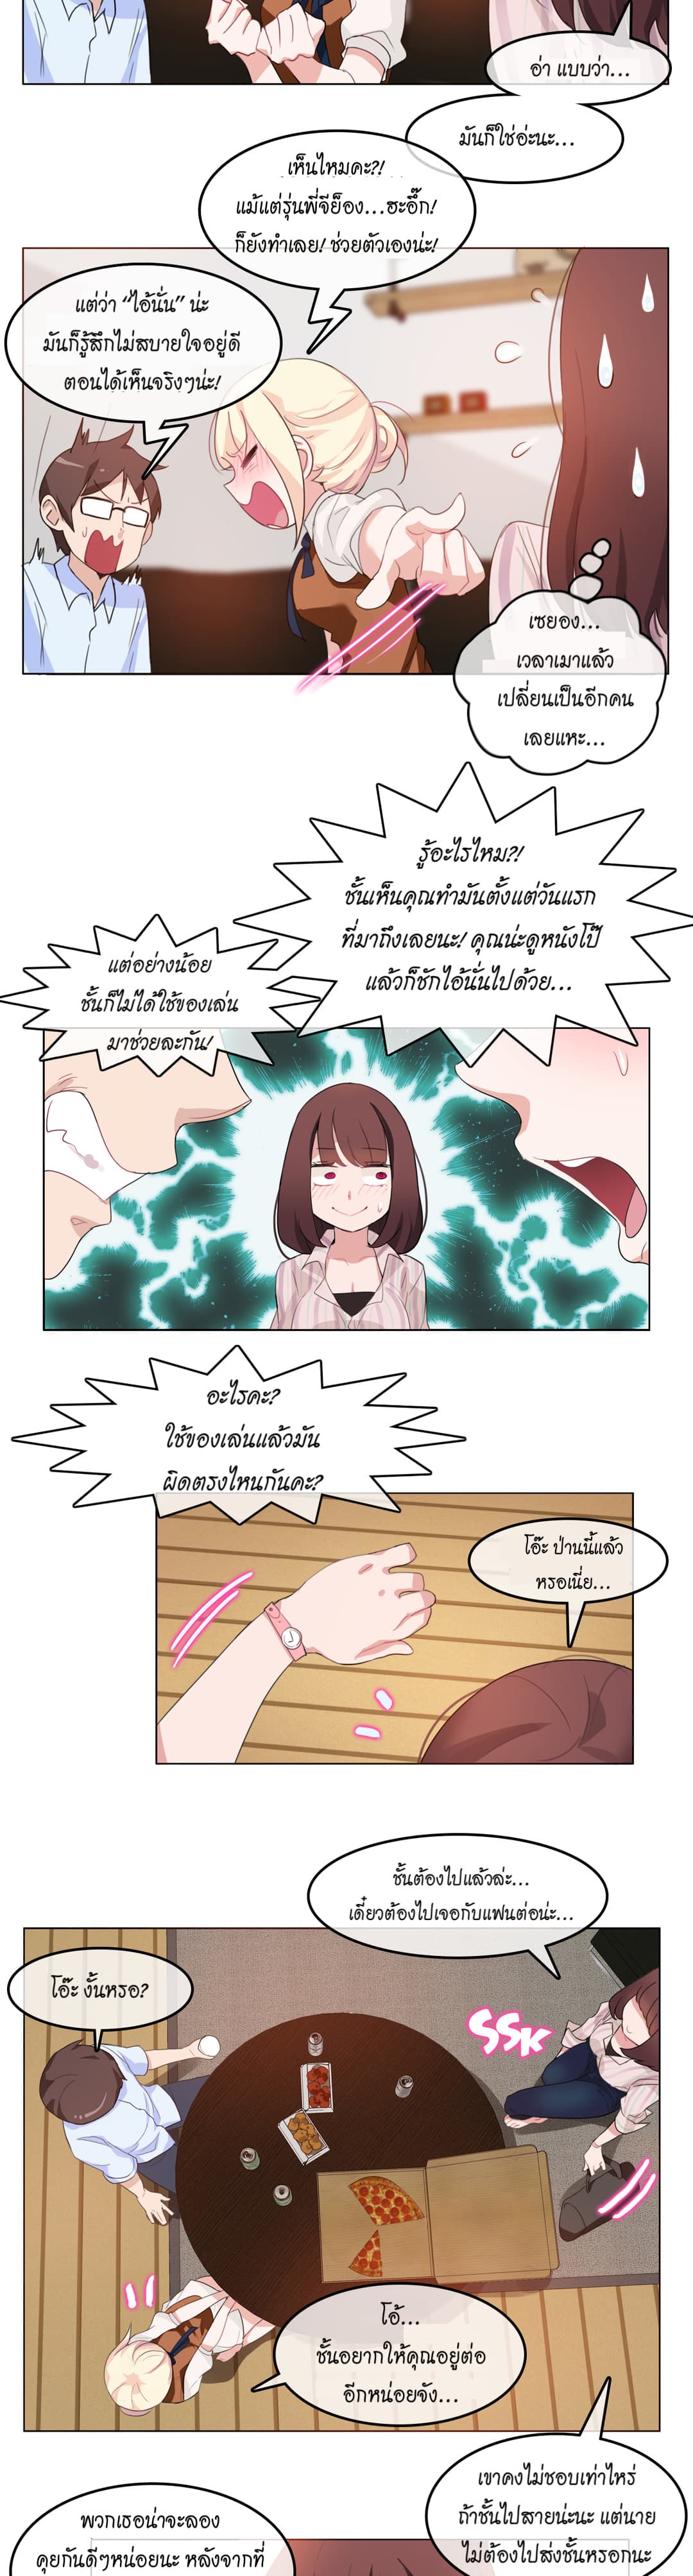 A Pervert’s Daily Life 9 (8)